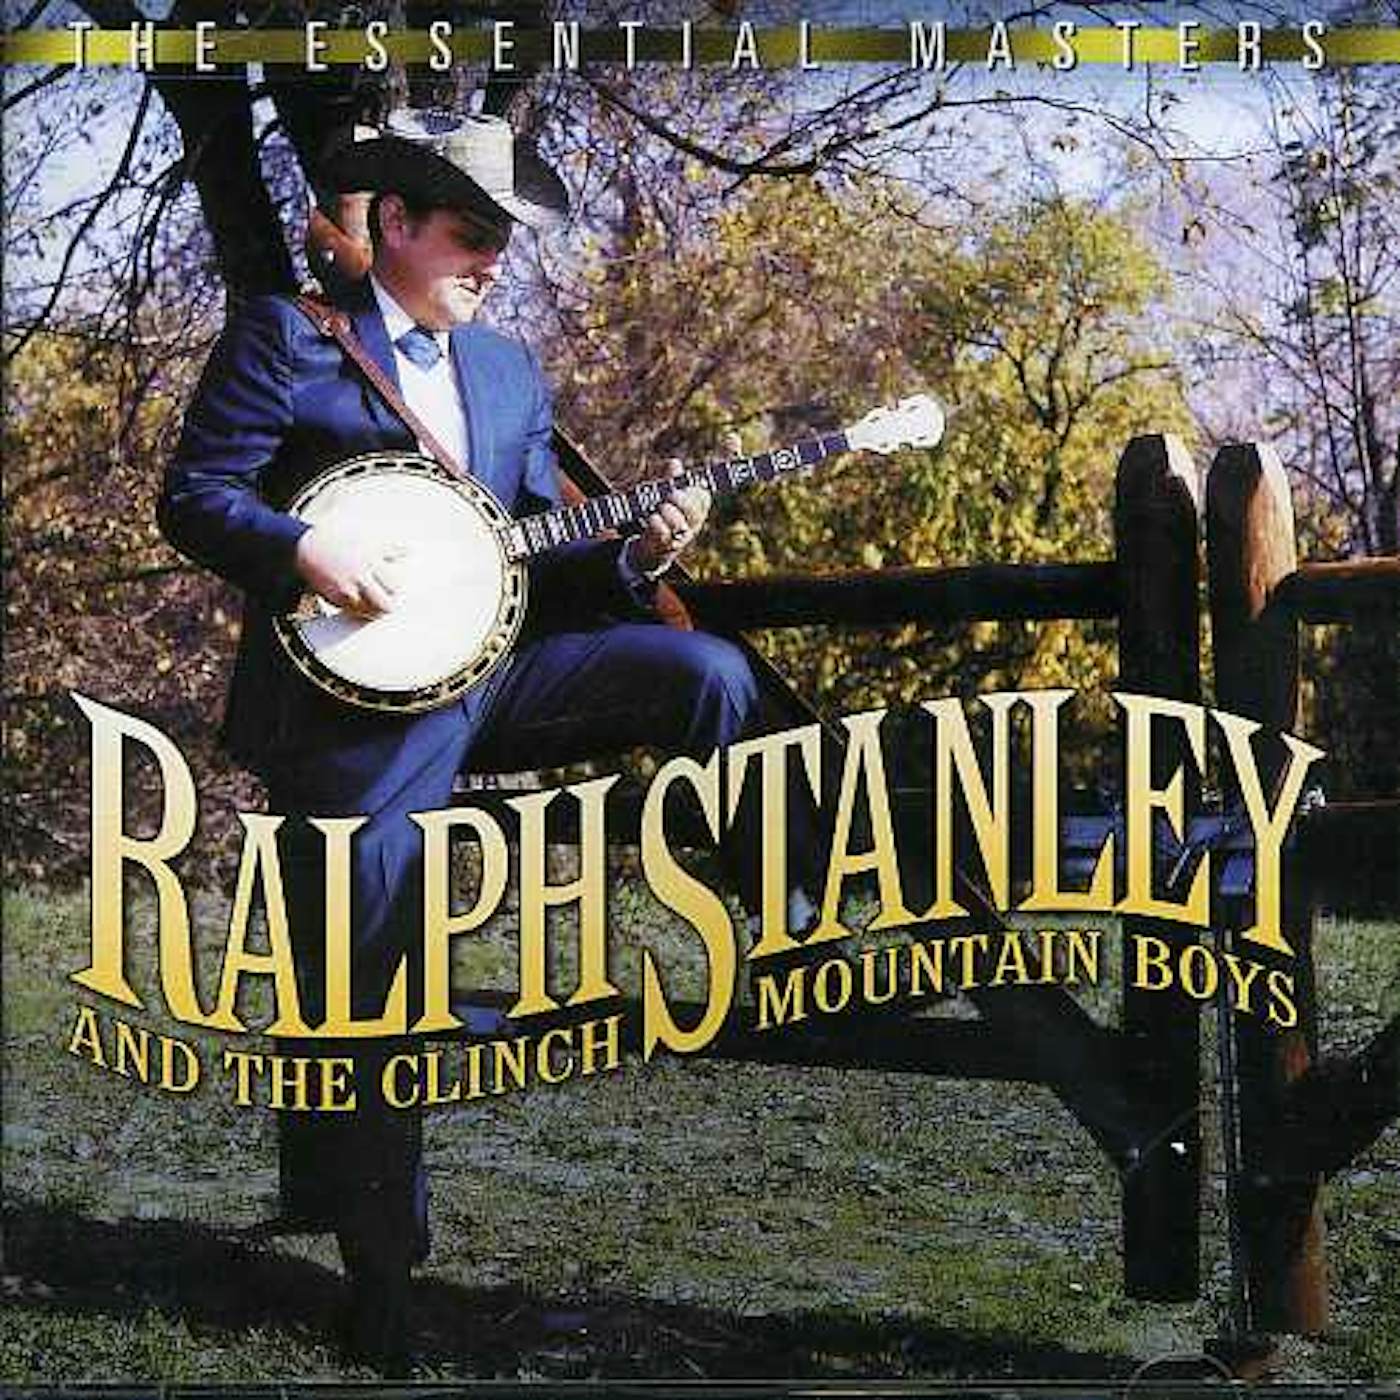 Ralph Stanley ESSENTIAL MASTERS CD